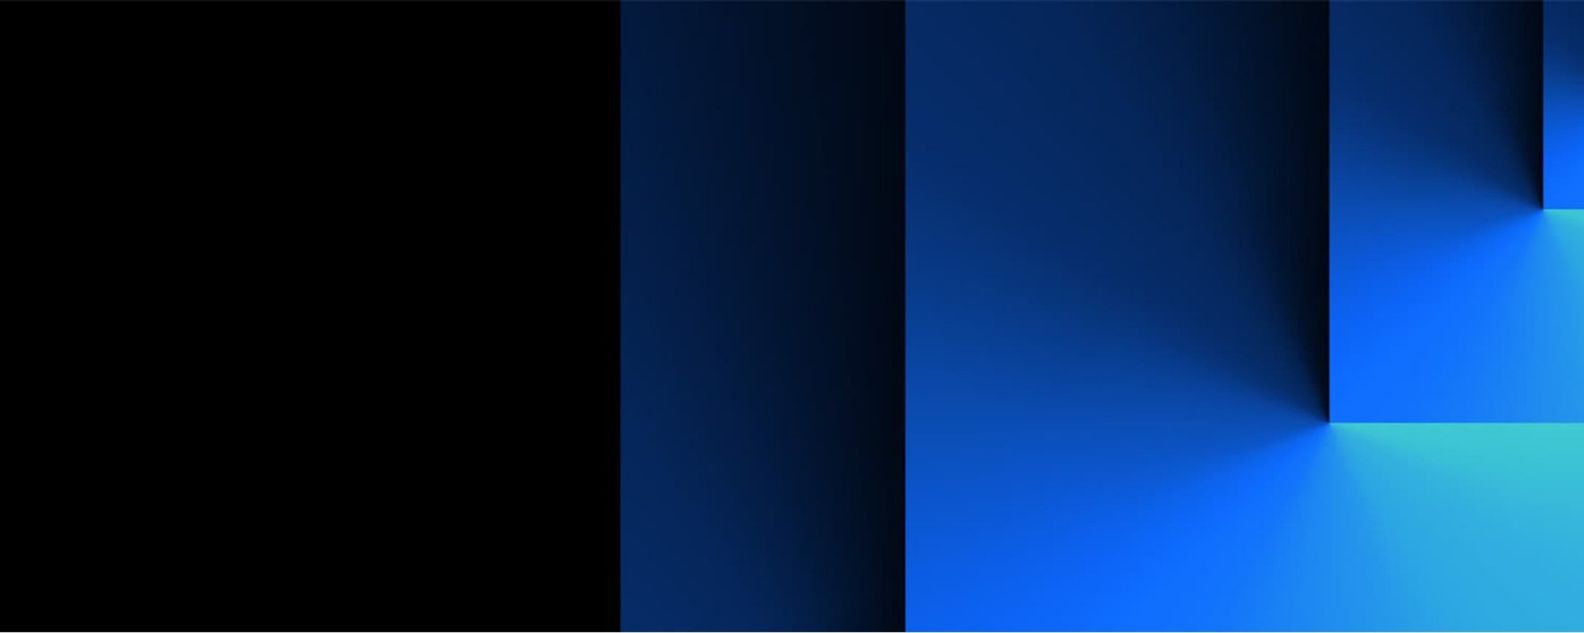 background black and blue